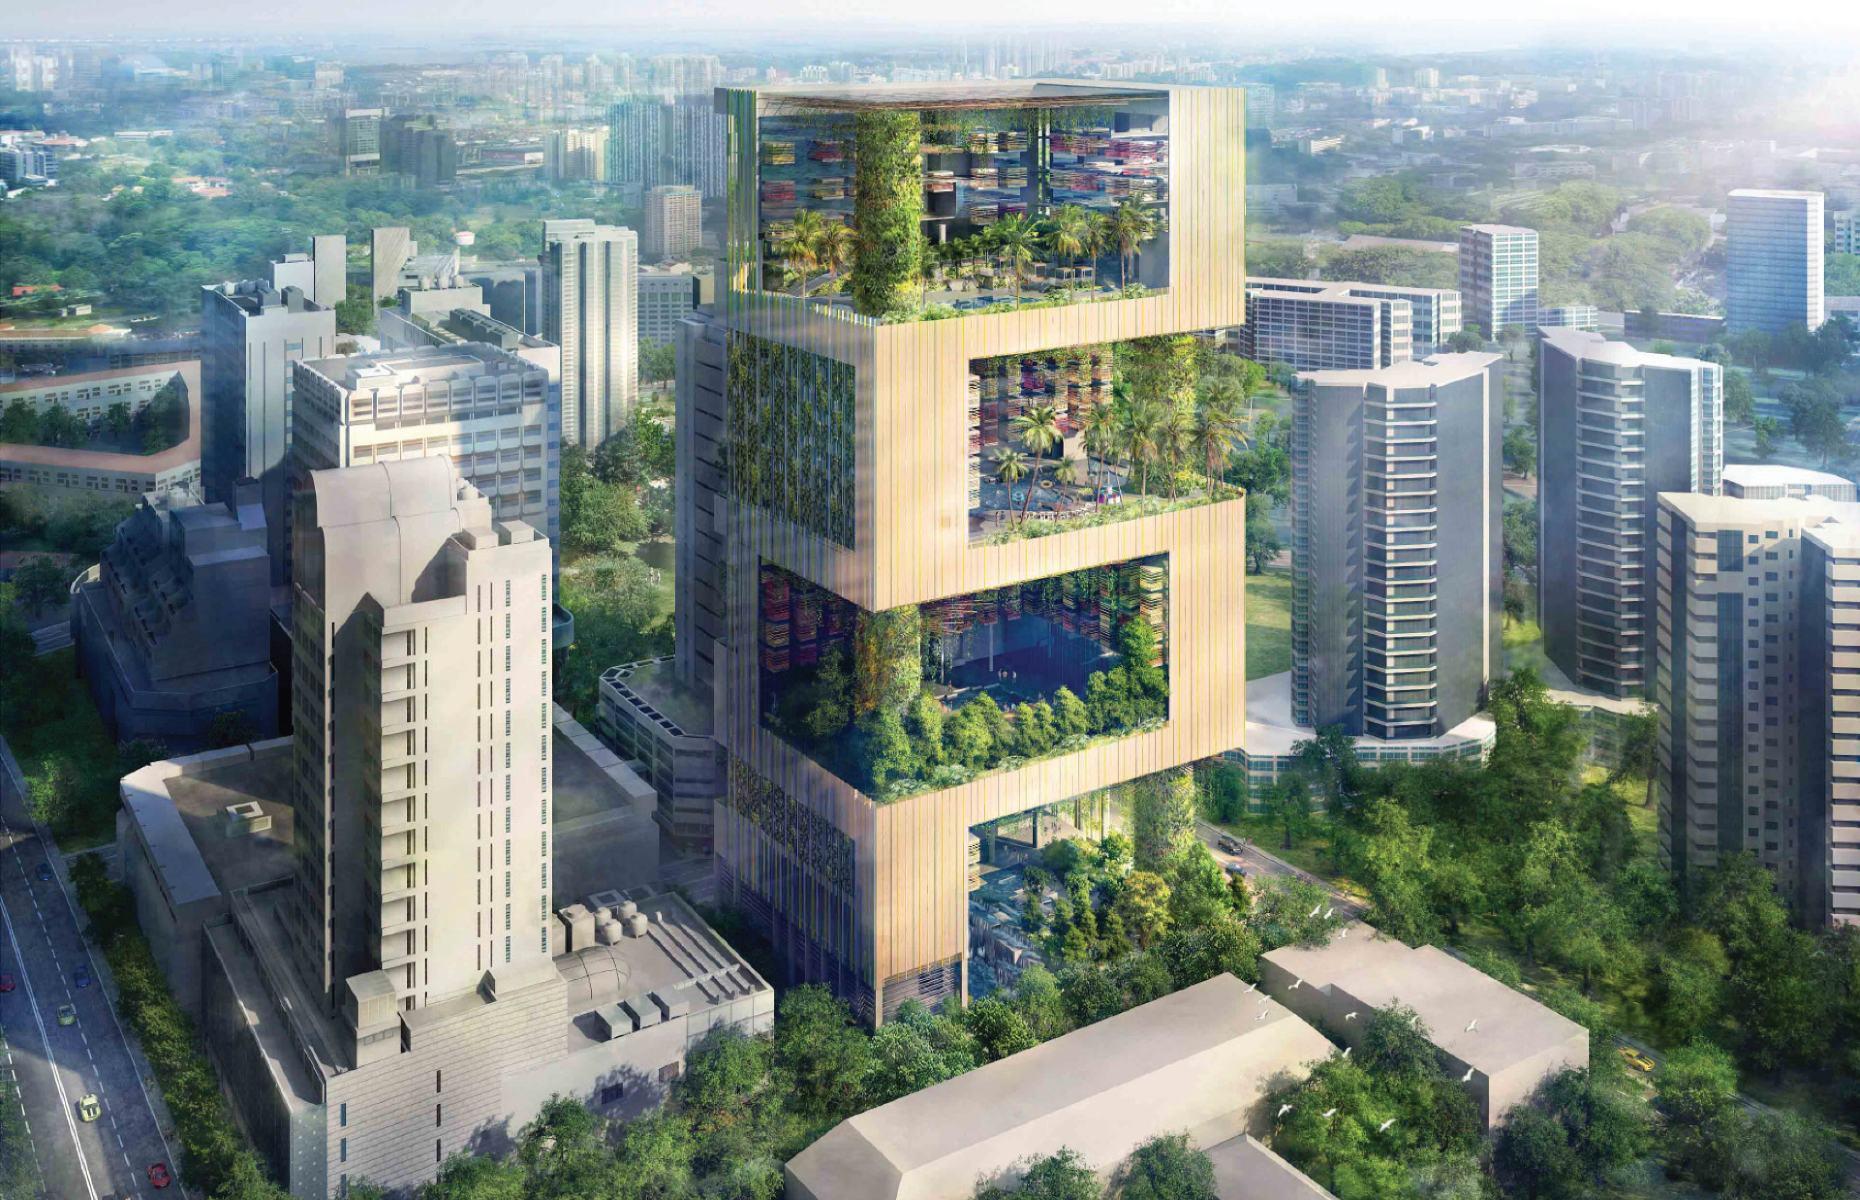 <p>This stunning new skyscraper is one of the few on our list to have an official opening date: <a href="https://www.panpacific.com/en/hotels-and-resorts/pp-orchard-sg.html">it’s set to start welcoming guests in April 2023</a>. Located in the heart of Singapore’s shopping district, the high-concept hotel will have four themed areas – based on forest, beach, garden and cloud – which will be spread across its four distinct strata.</p>